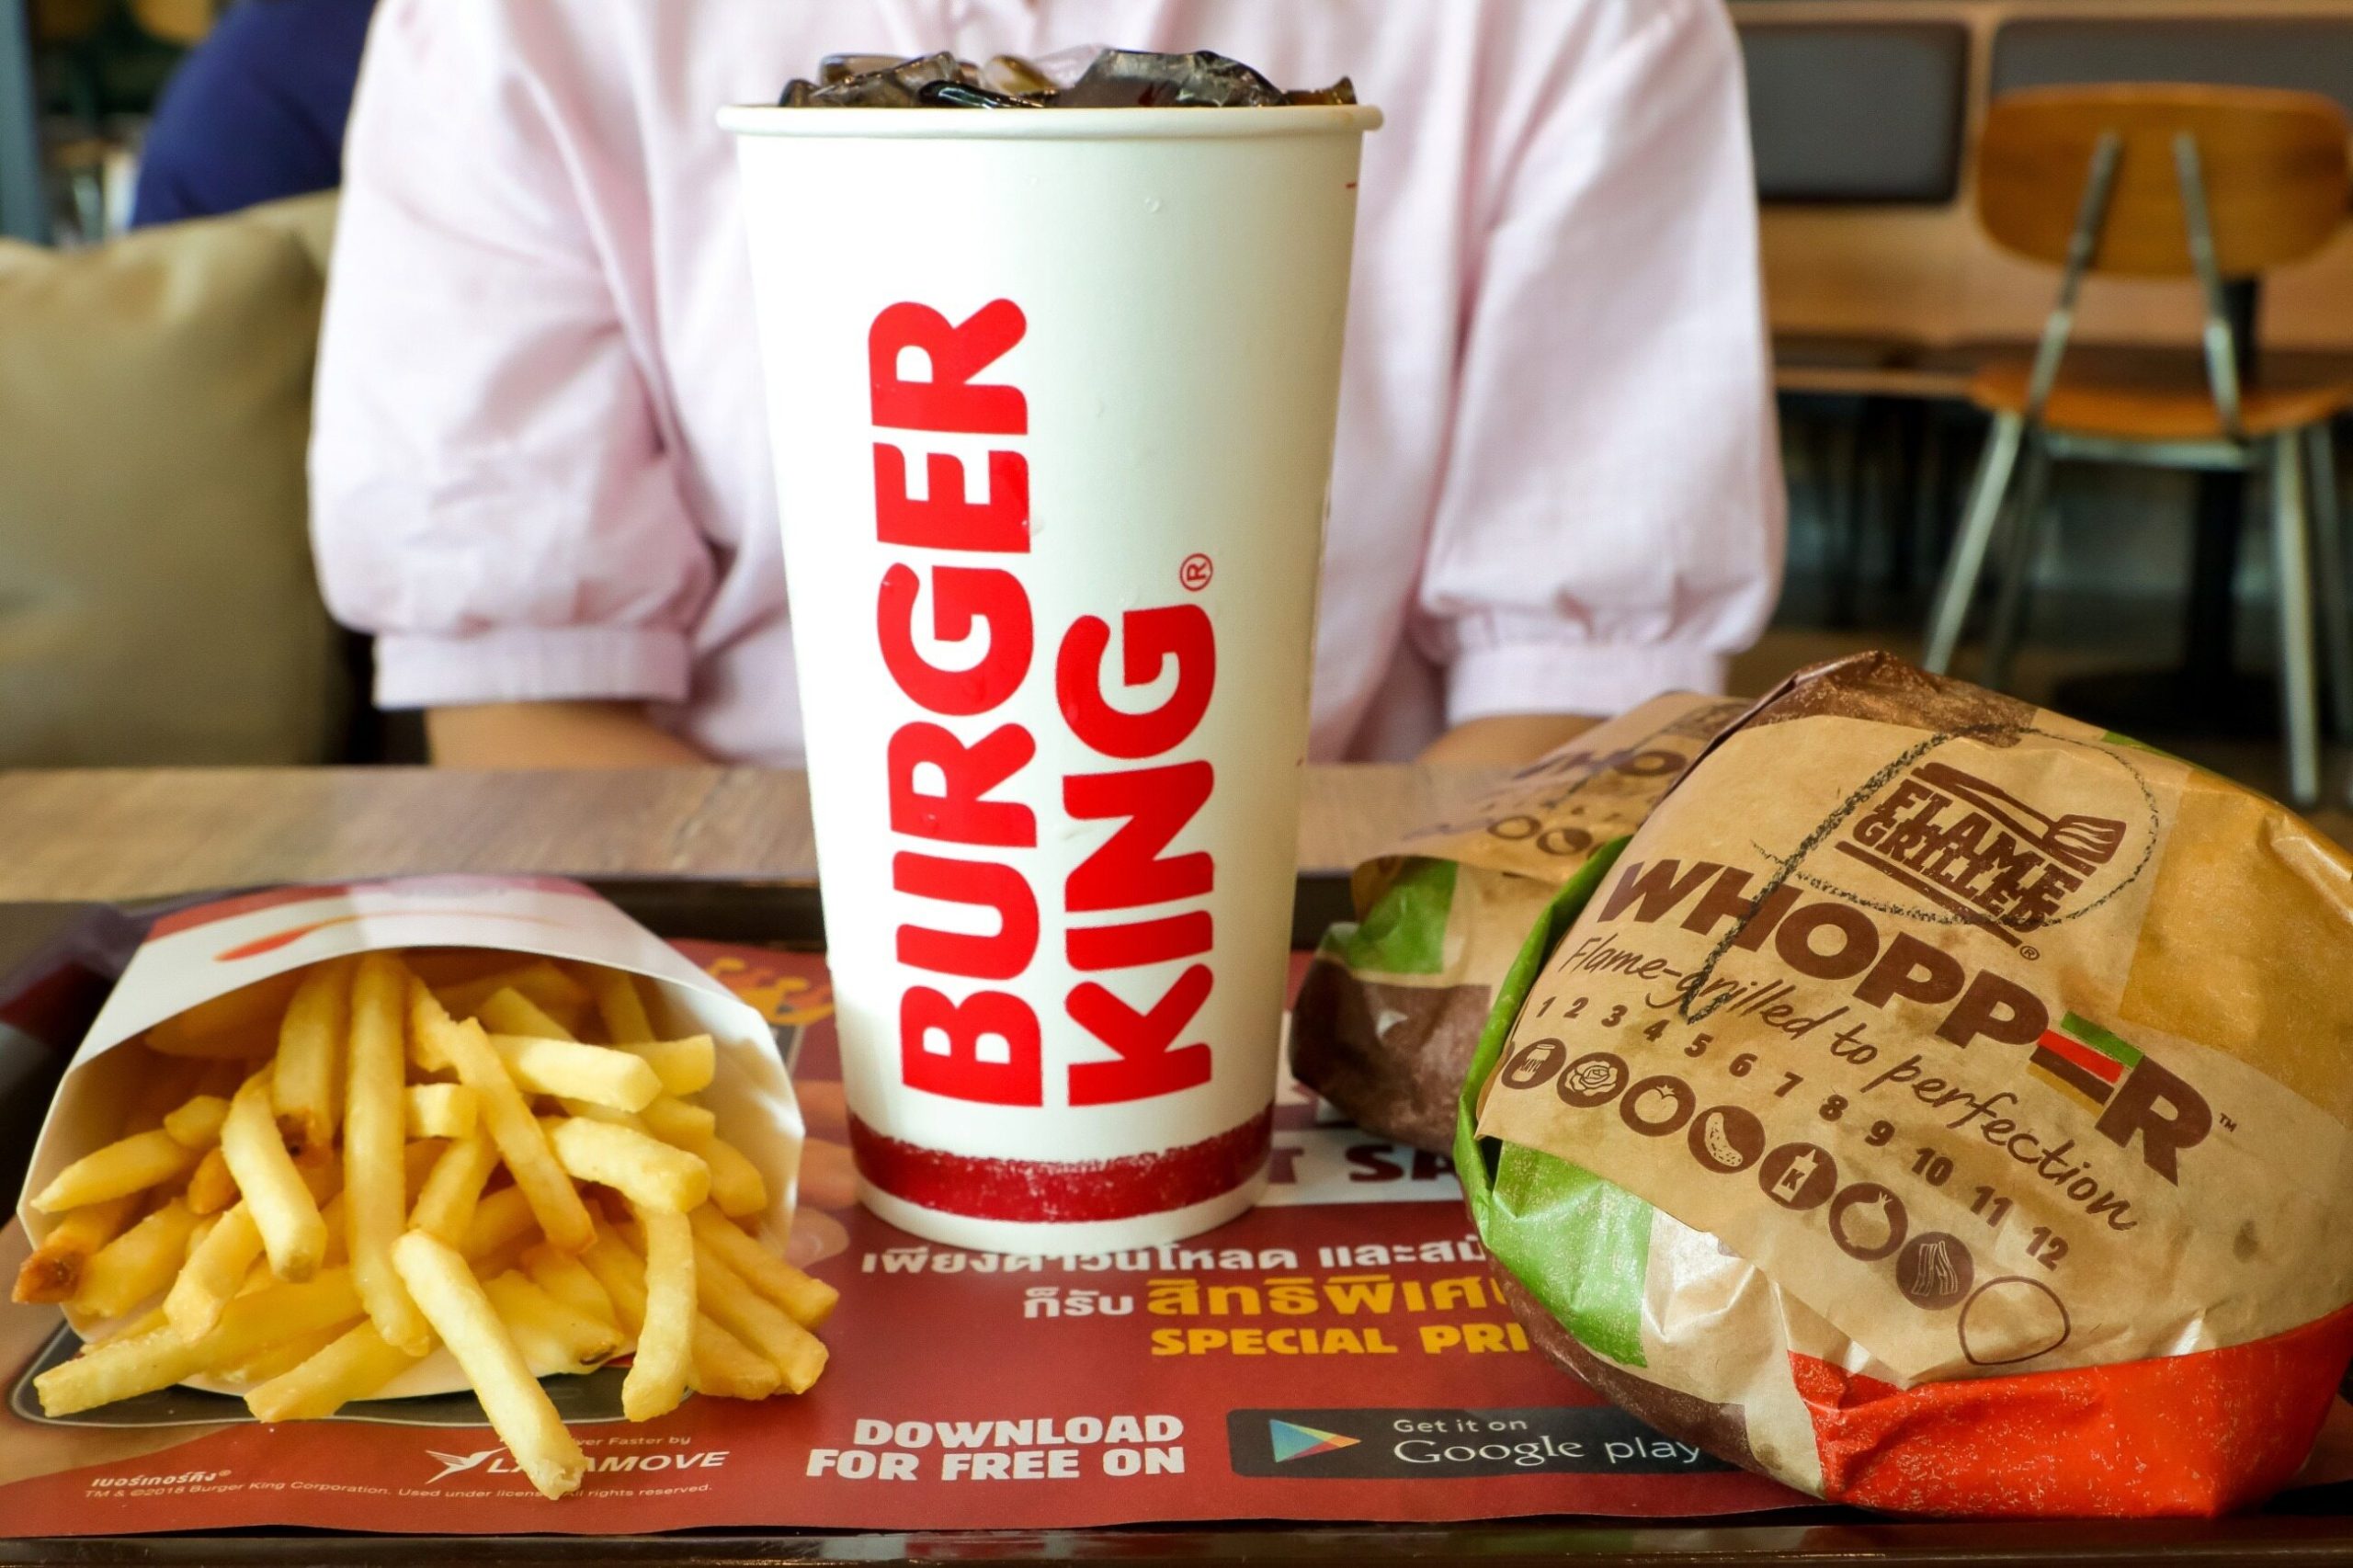 Burger King is being grilled.  The company posted an outrageous post on Women's Day